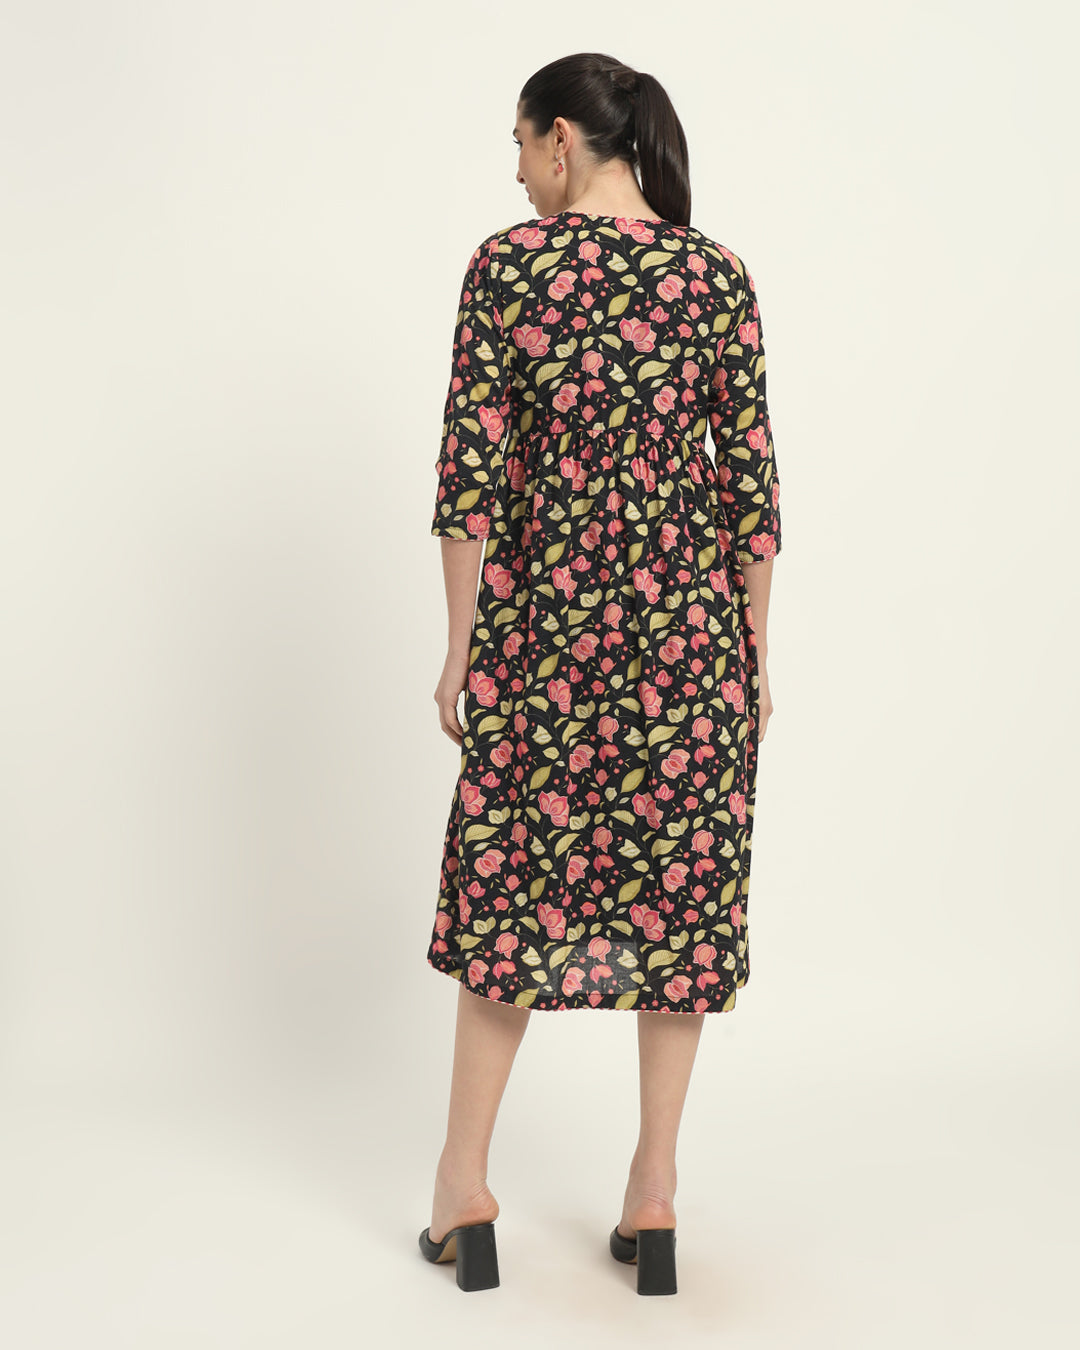 The Floral Wish Button Dress